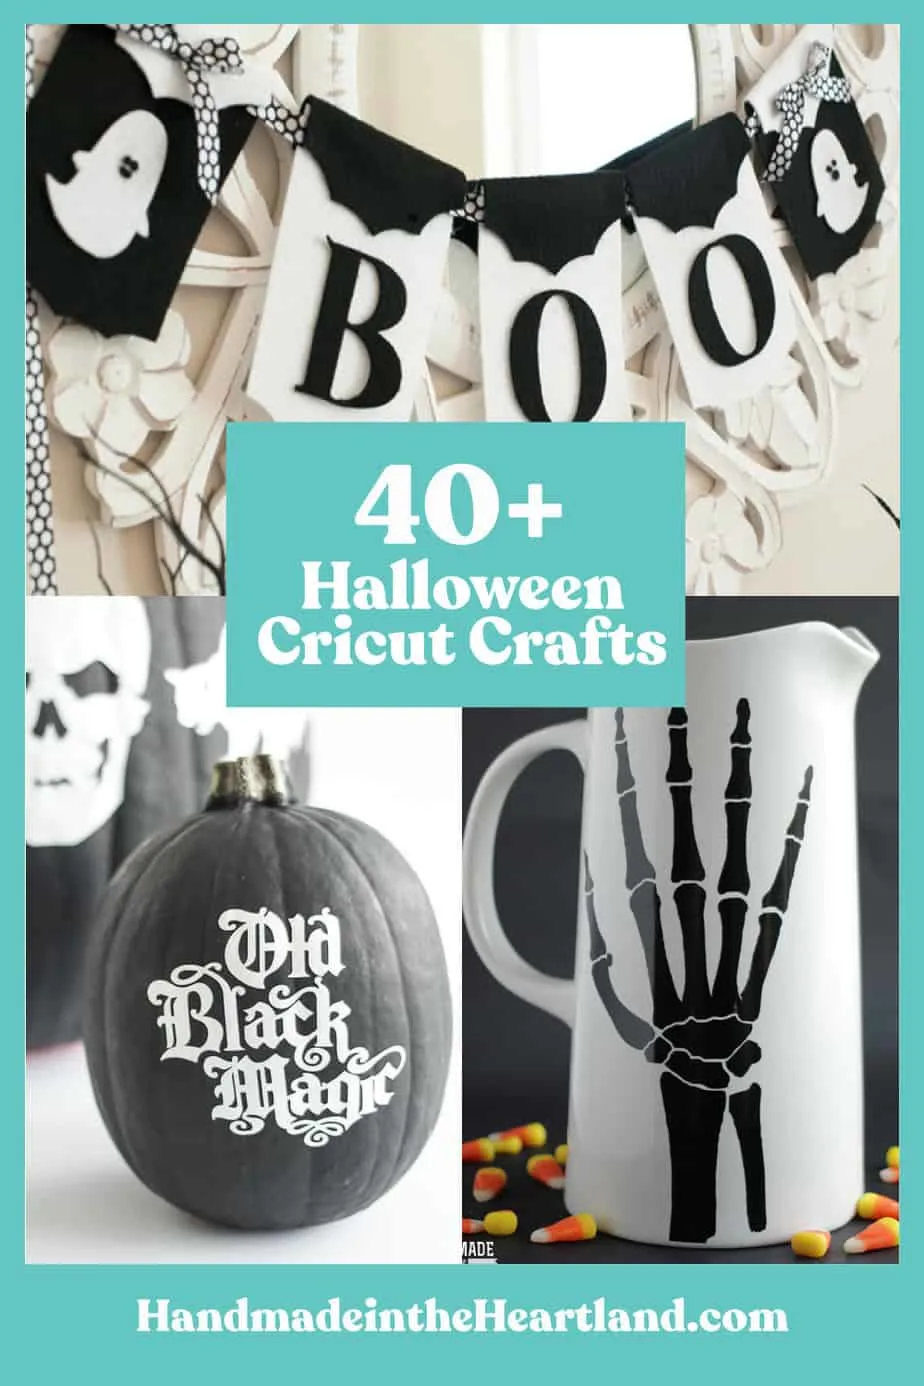 27 Cricut Projects and Crafts Using Vinyl - Color Me Crafty